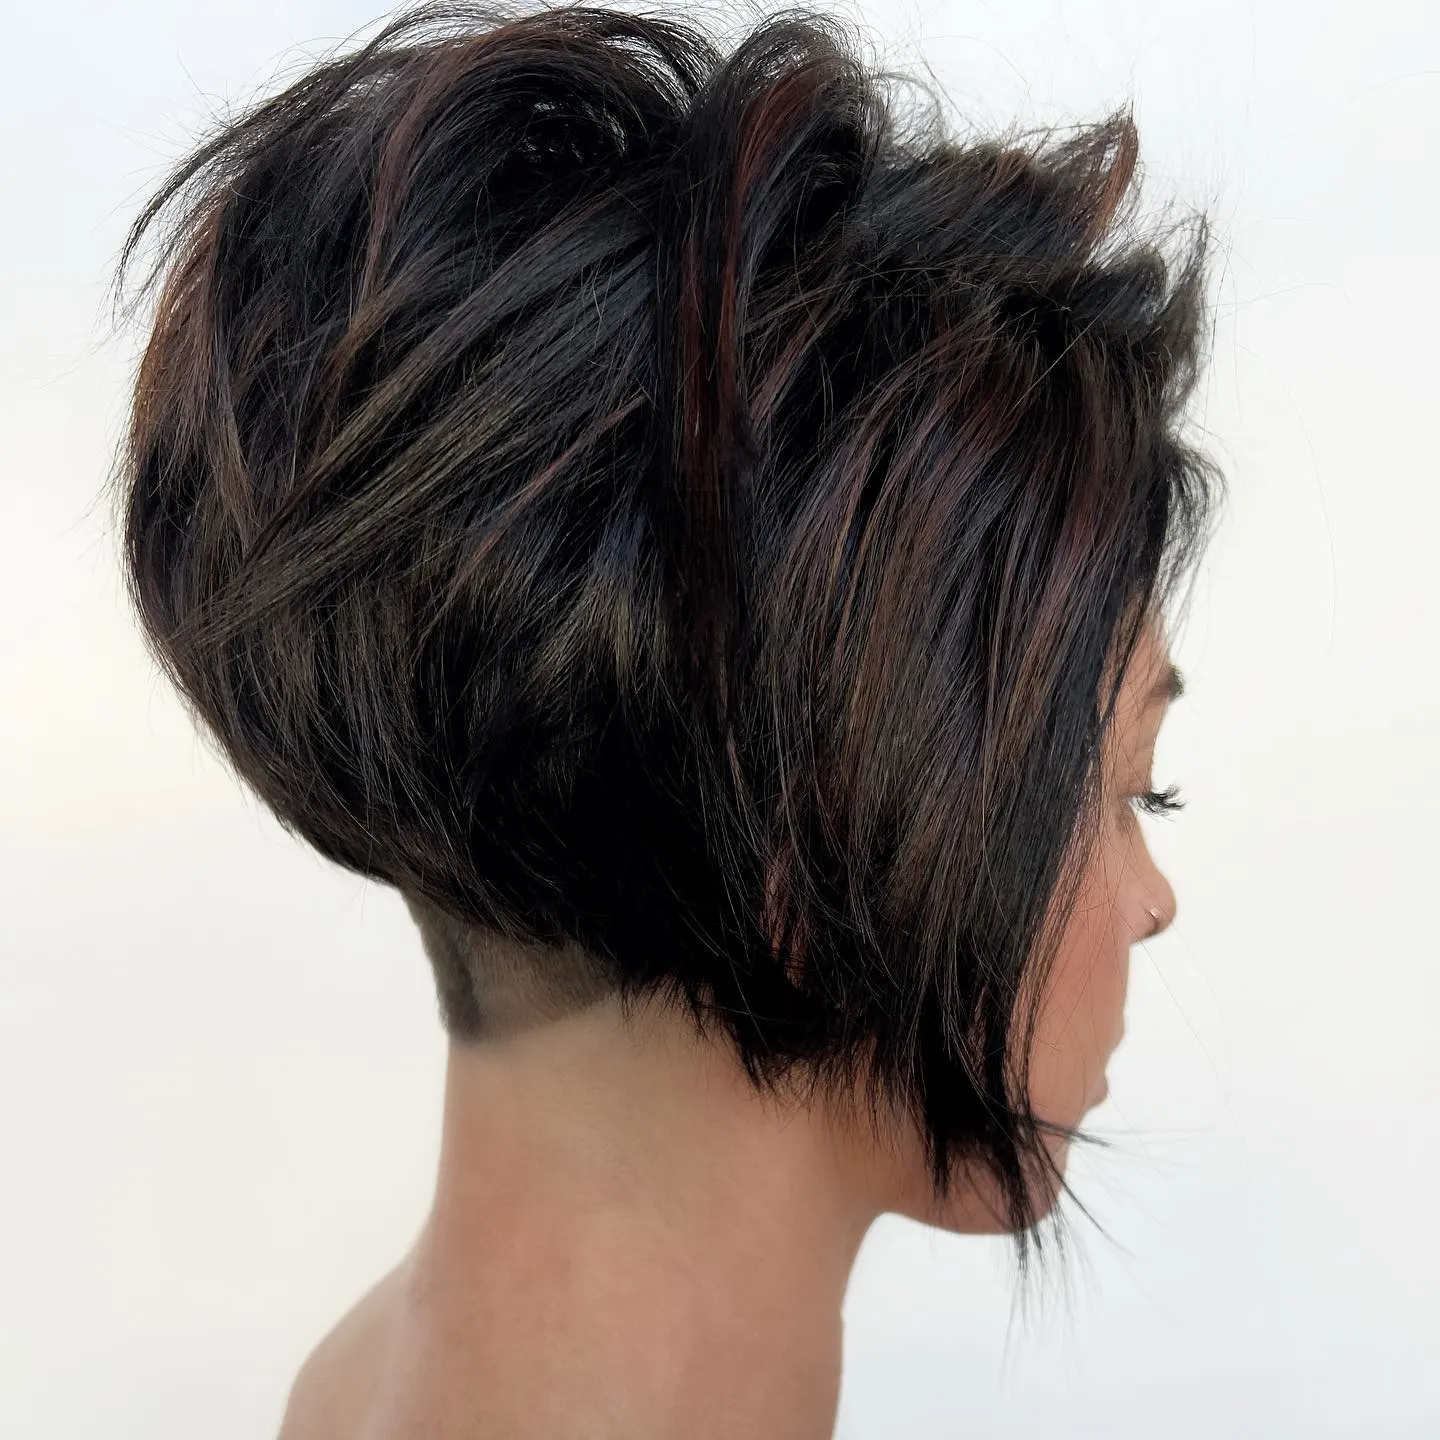 25 Stacked Bob With Undercut Ideas To Try If You Need A Change